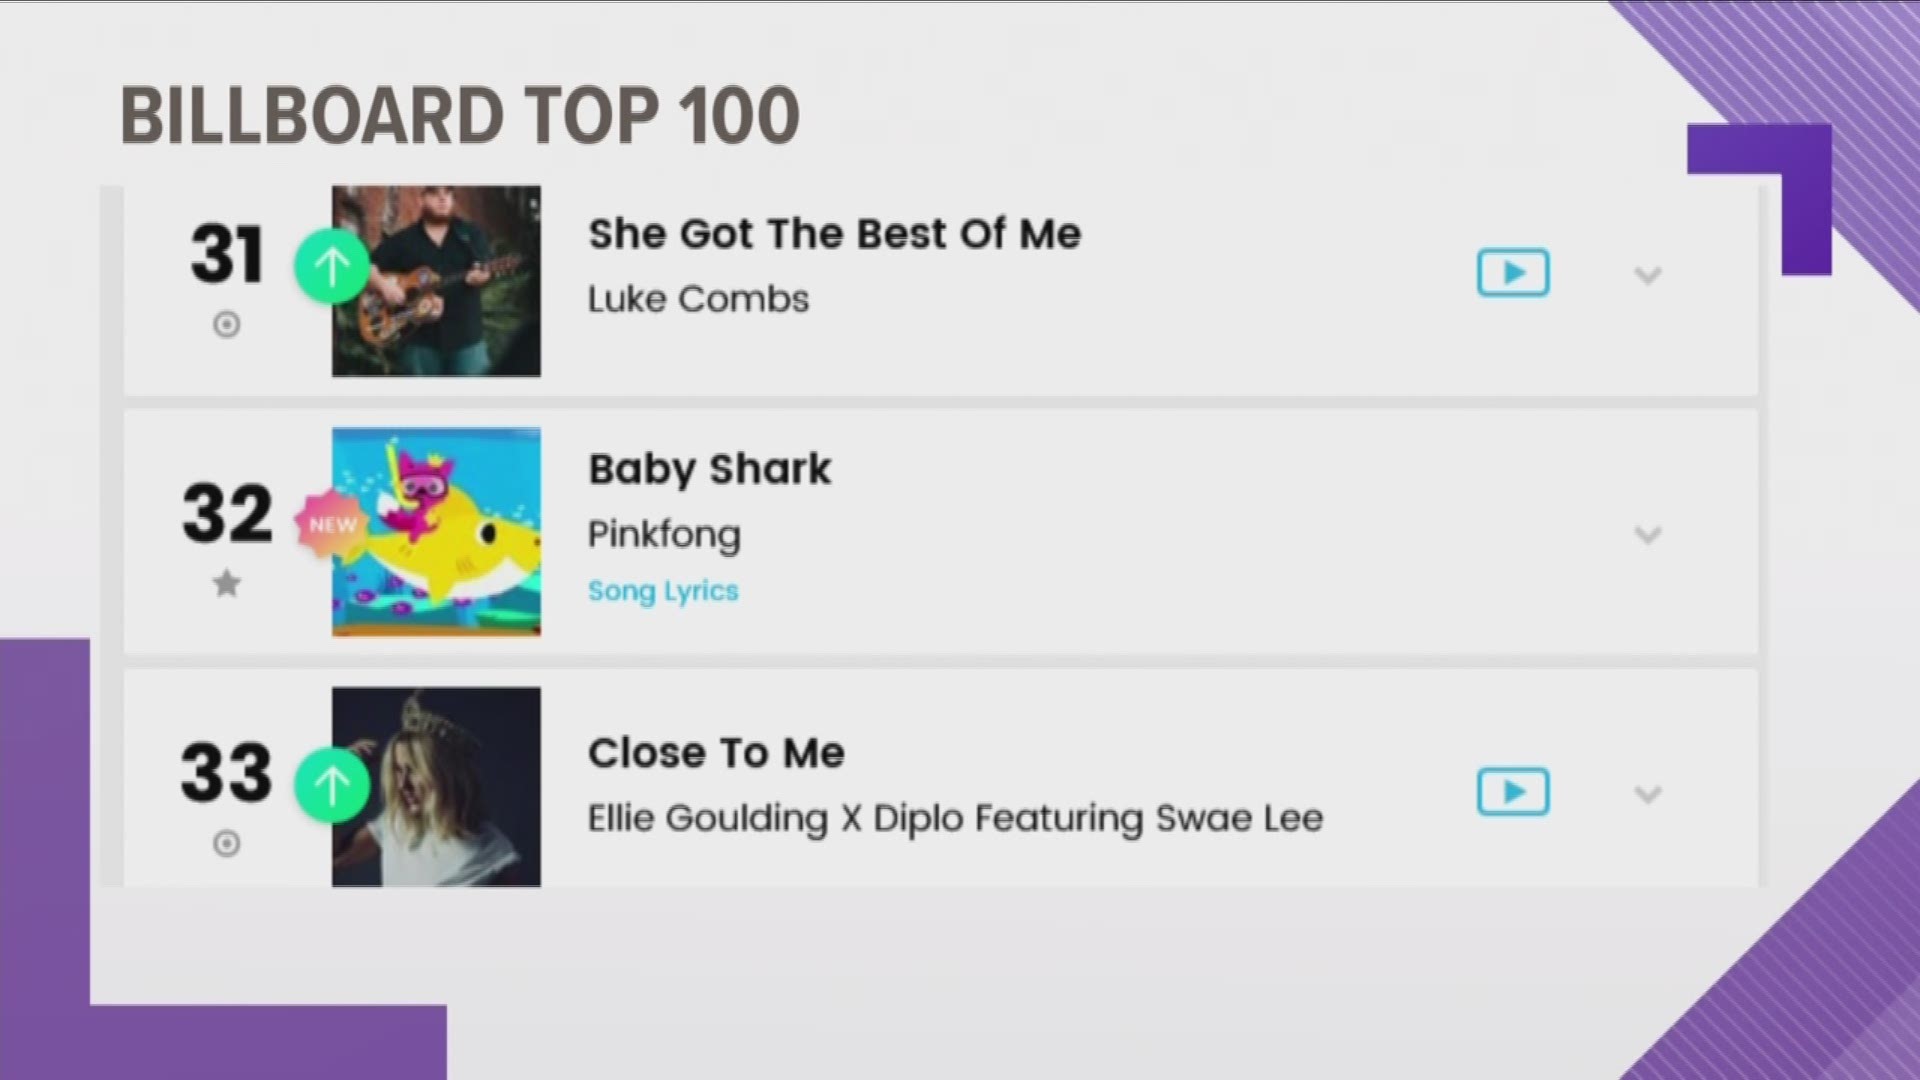 That catchy children’s song ‘Baby Shark’ has Do Do Do Do Do Do-ed into the top of Billboard and YouTube lists.